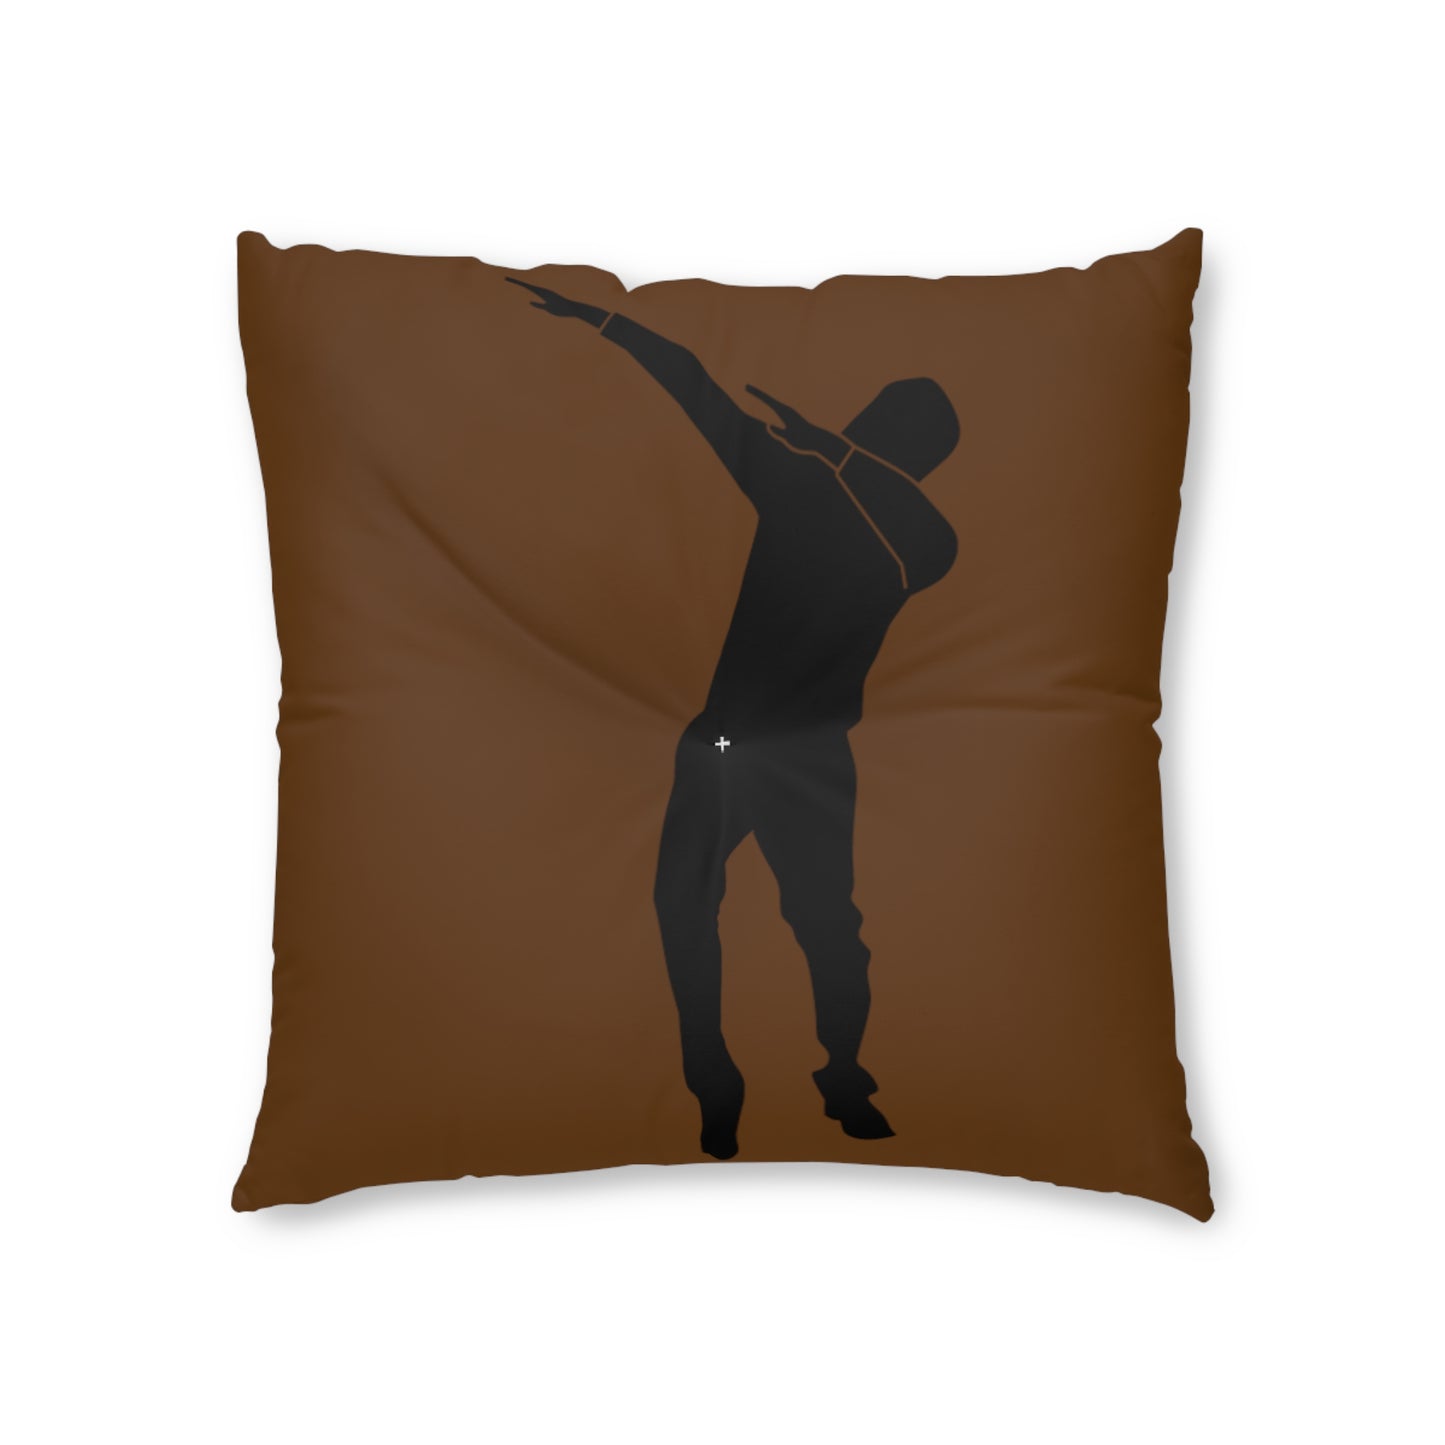 Tufted Floor Pillow, Square: Dance Brown